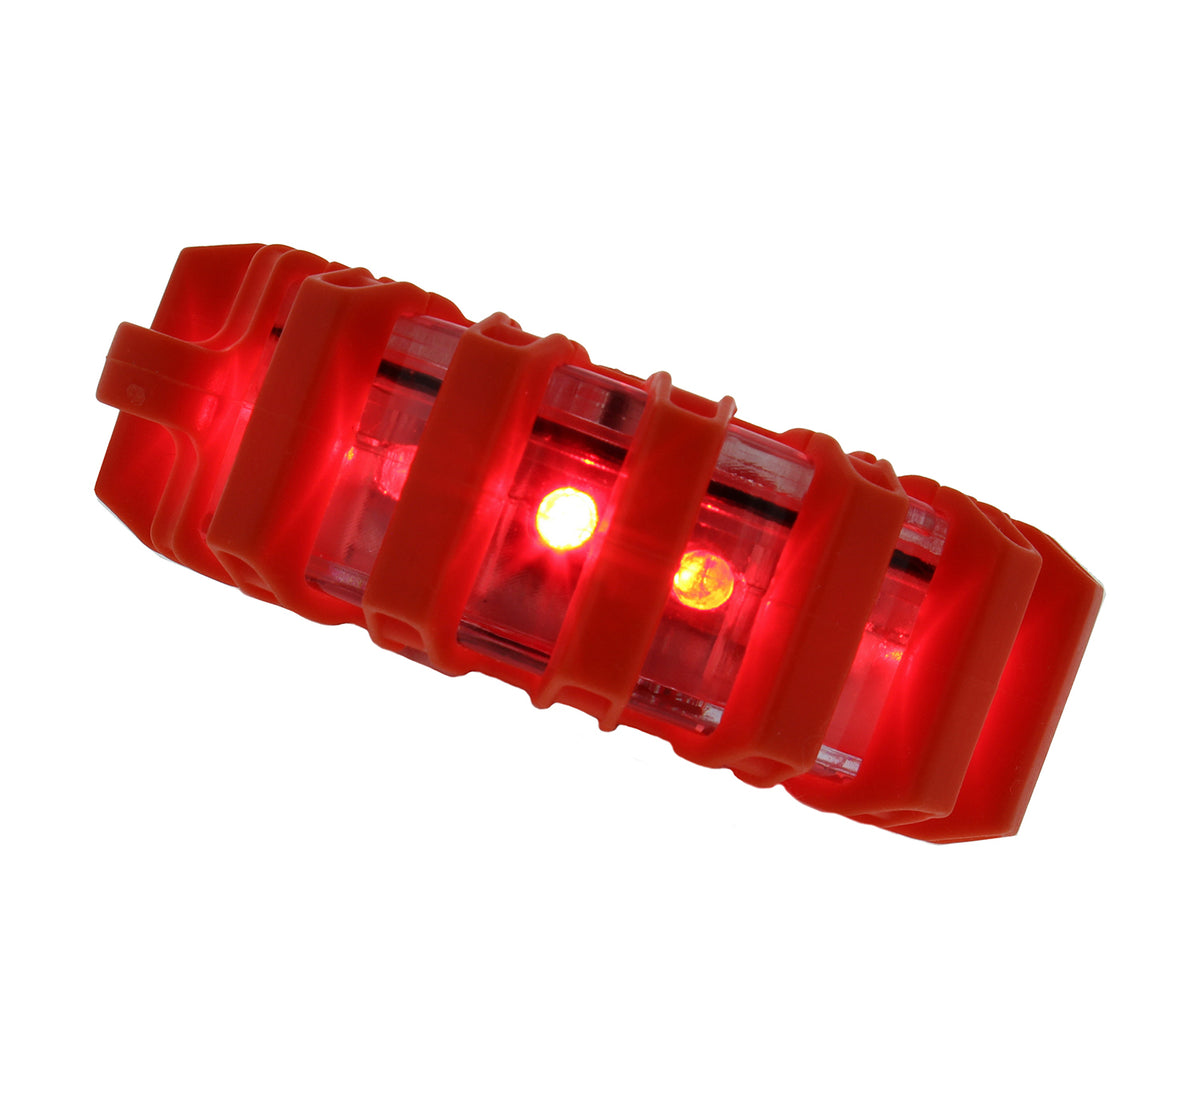 Portable LED Safety Flare Signal Light w/ 9 Warning Light Modes 3-PACK in Red